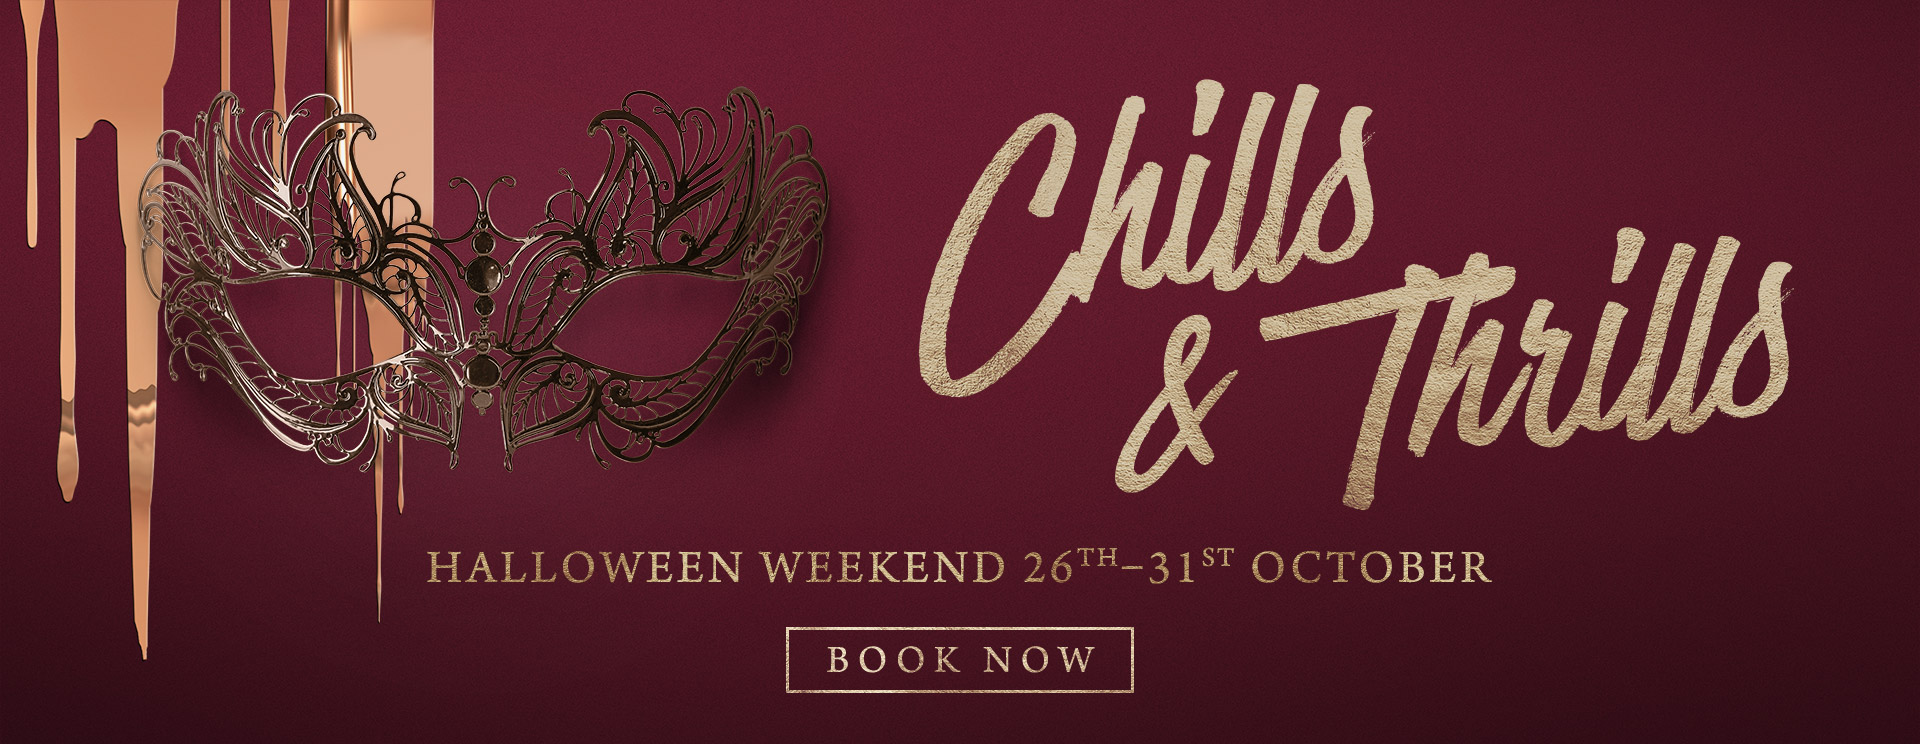 Chills & Thrills this Halloween at The Old Cottage